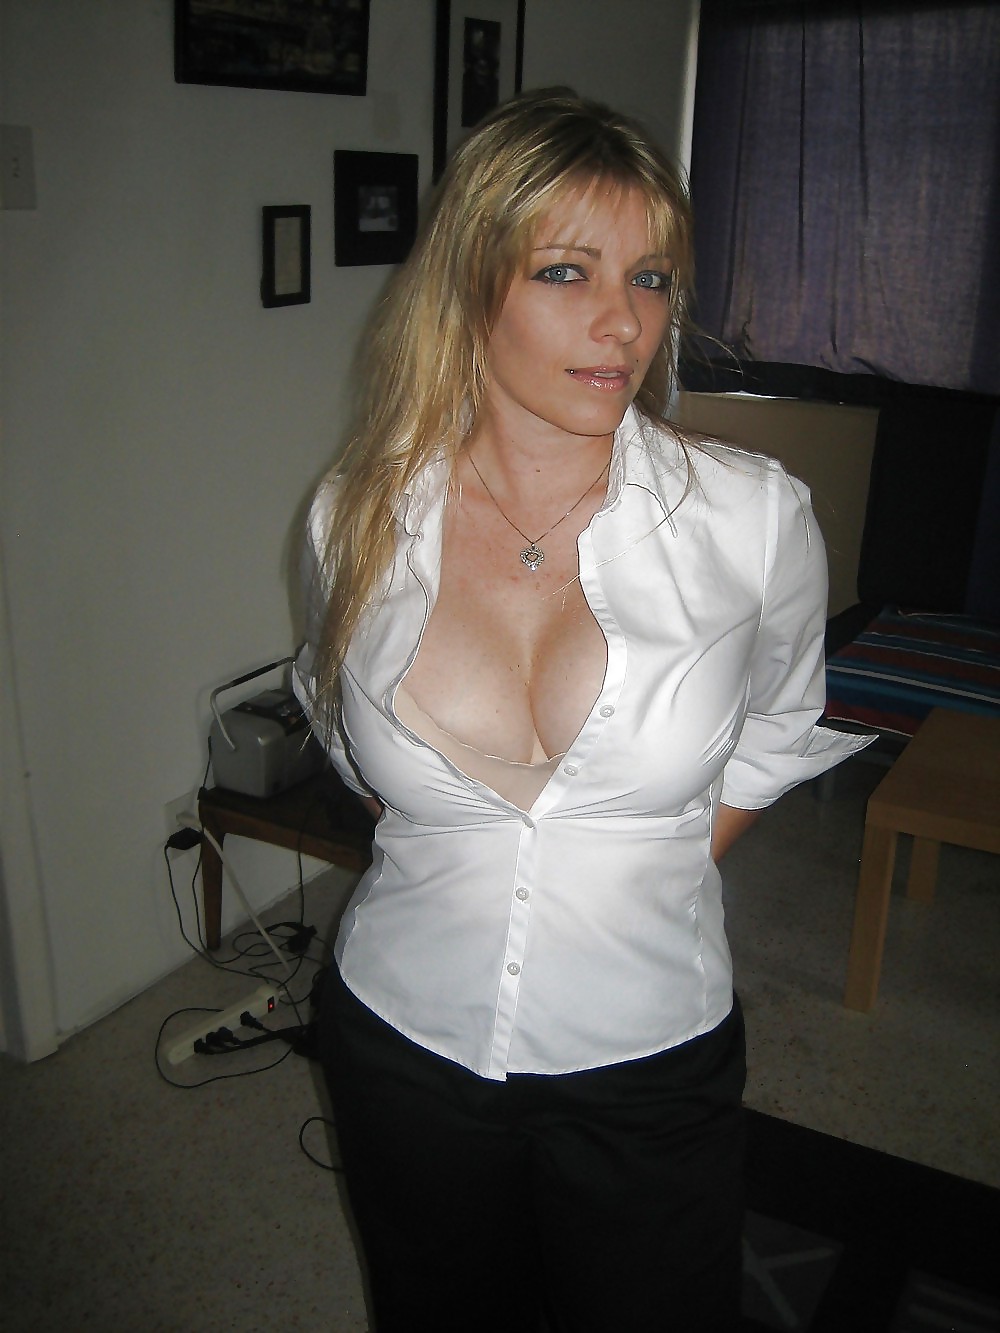 ¡¡The milf files part 12!!
 #22053757